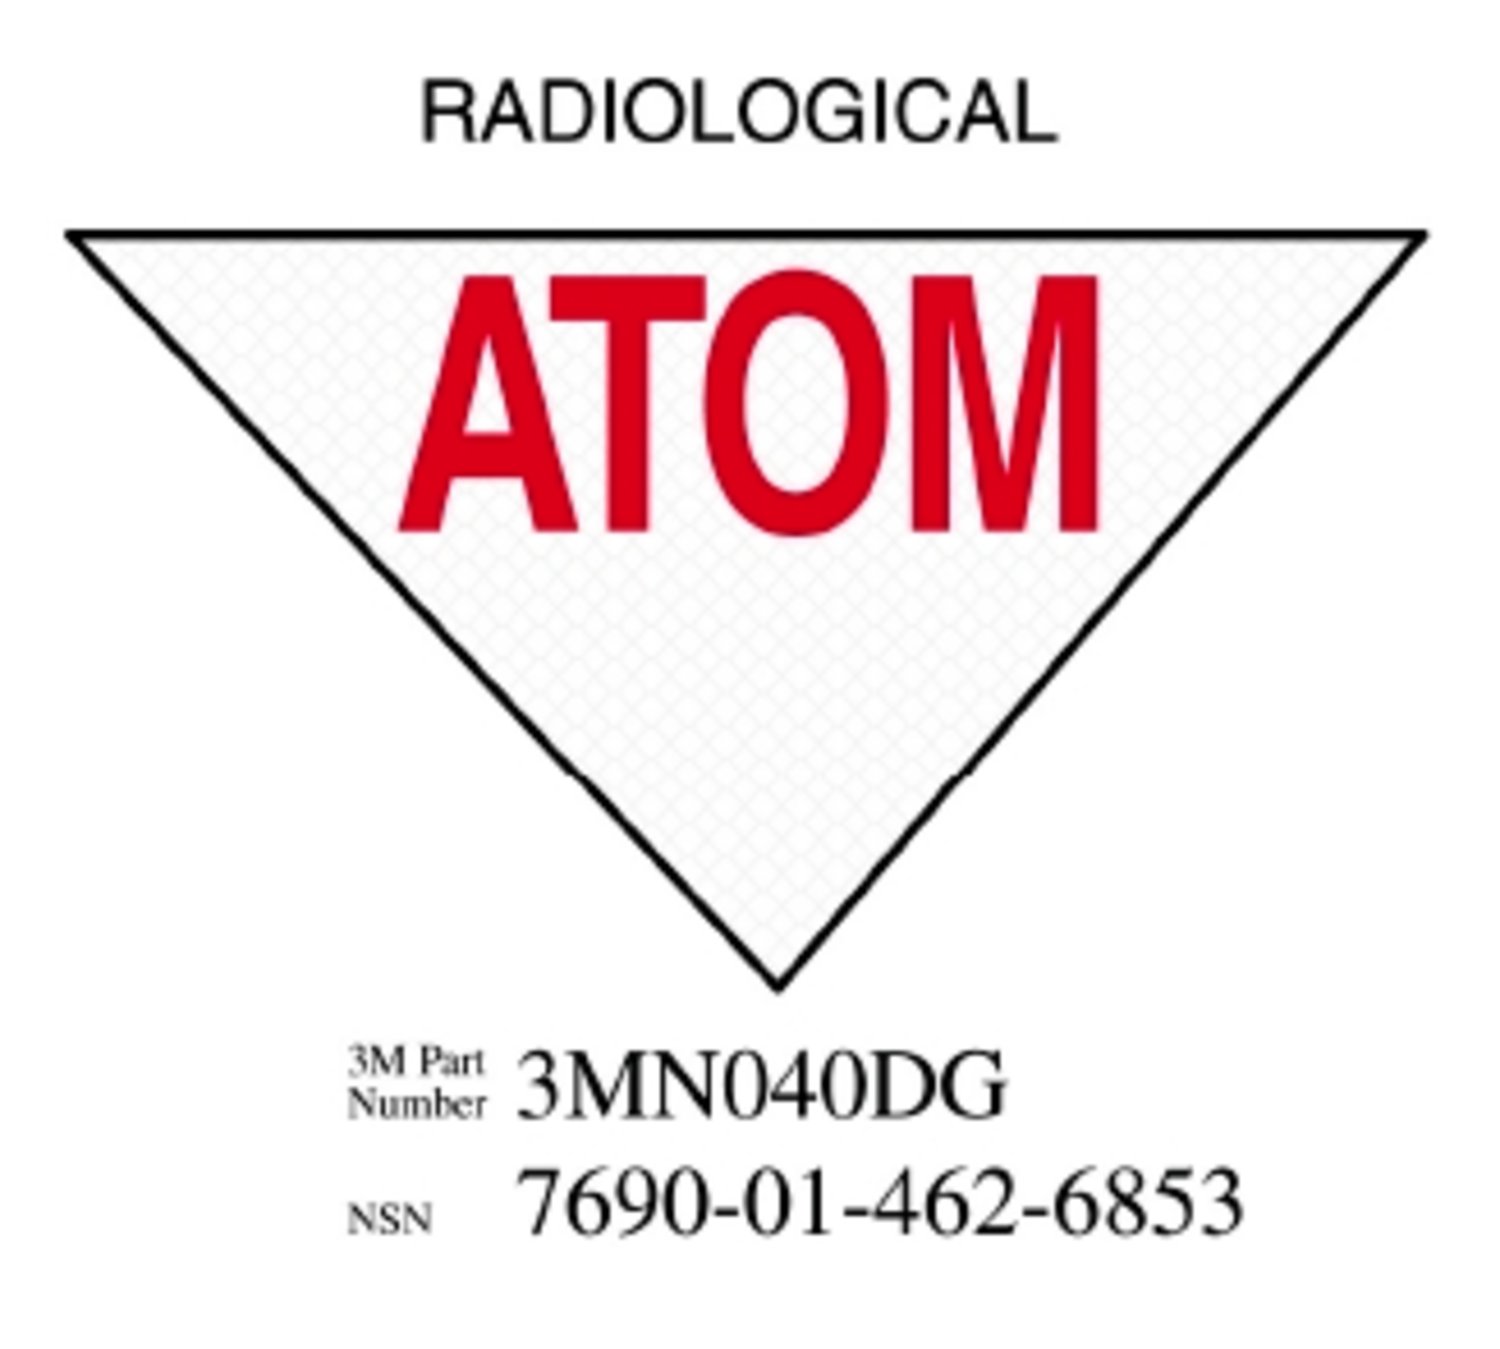 7010343534 - 3M Diamond Grade Damage Control Sign 3MN040DG, "RADIOLOG", 11.5 in x 8
in, 10/Package